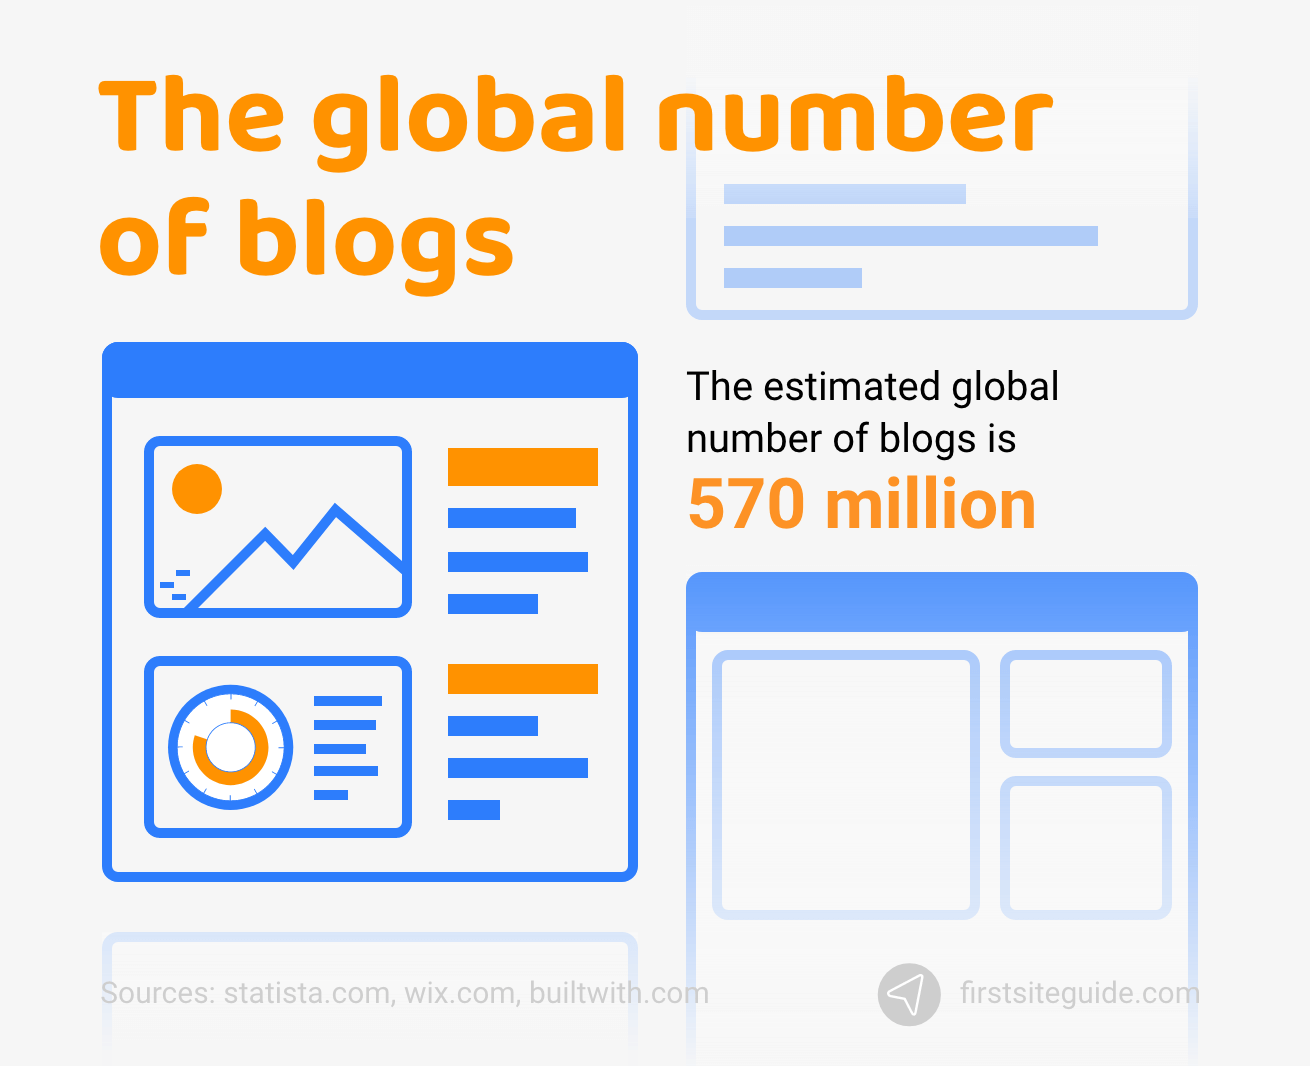 The global number of blogs